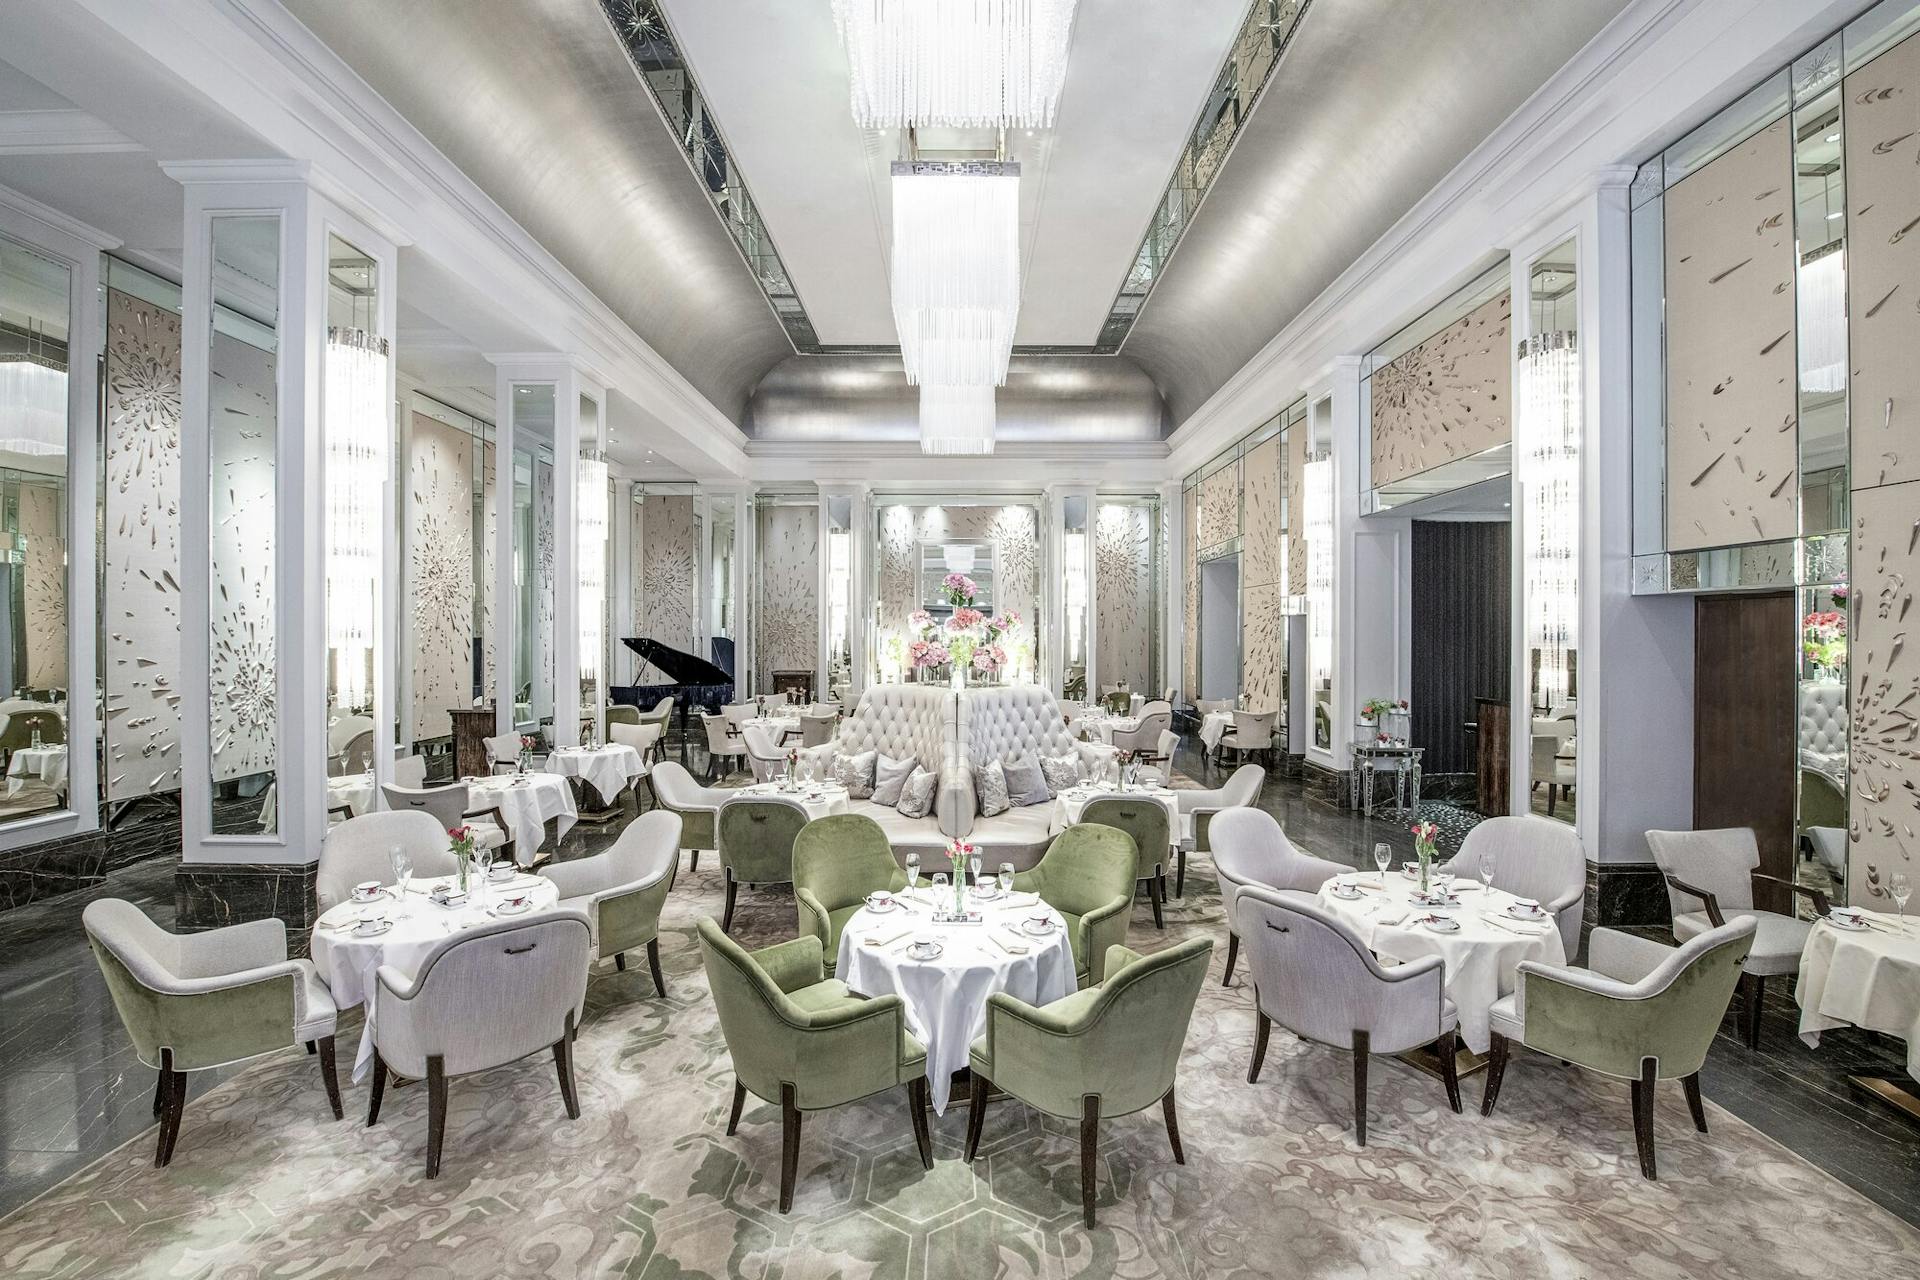 The Langham, London Selects SevenRooms to Power Its Guest F&B Experience